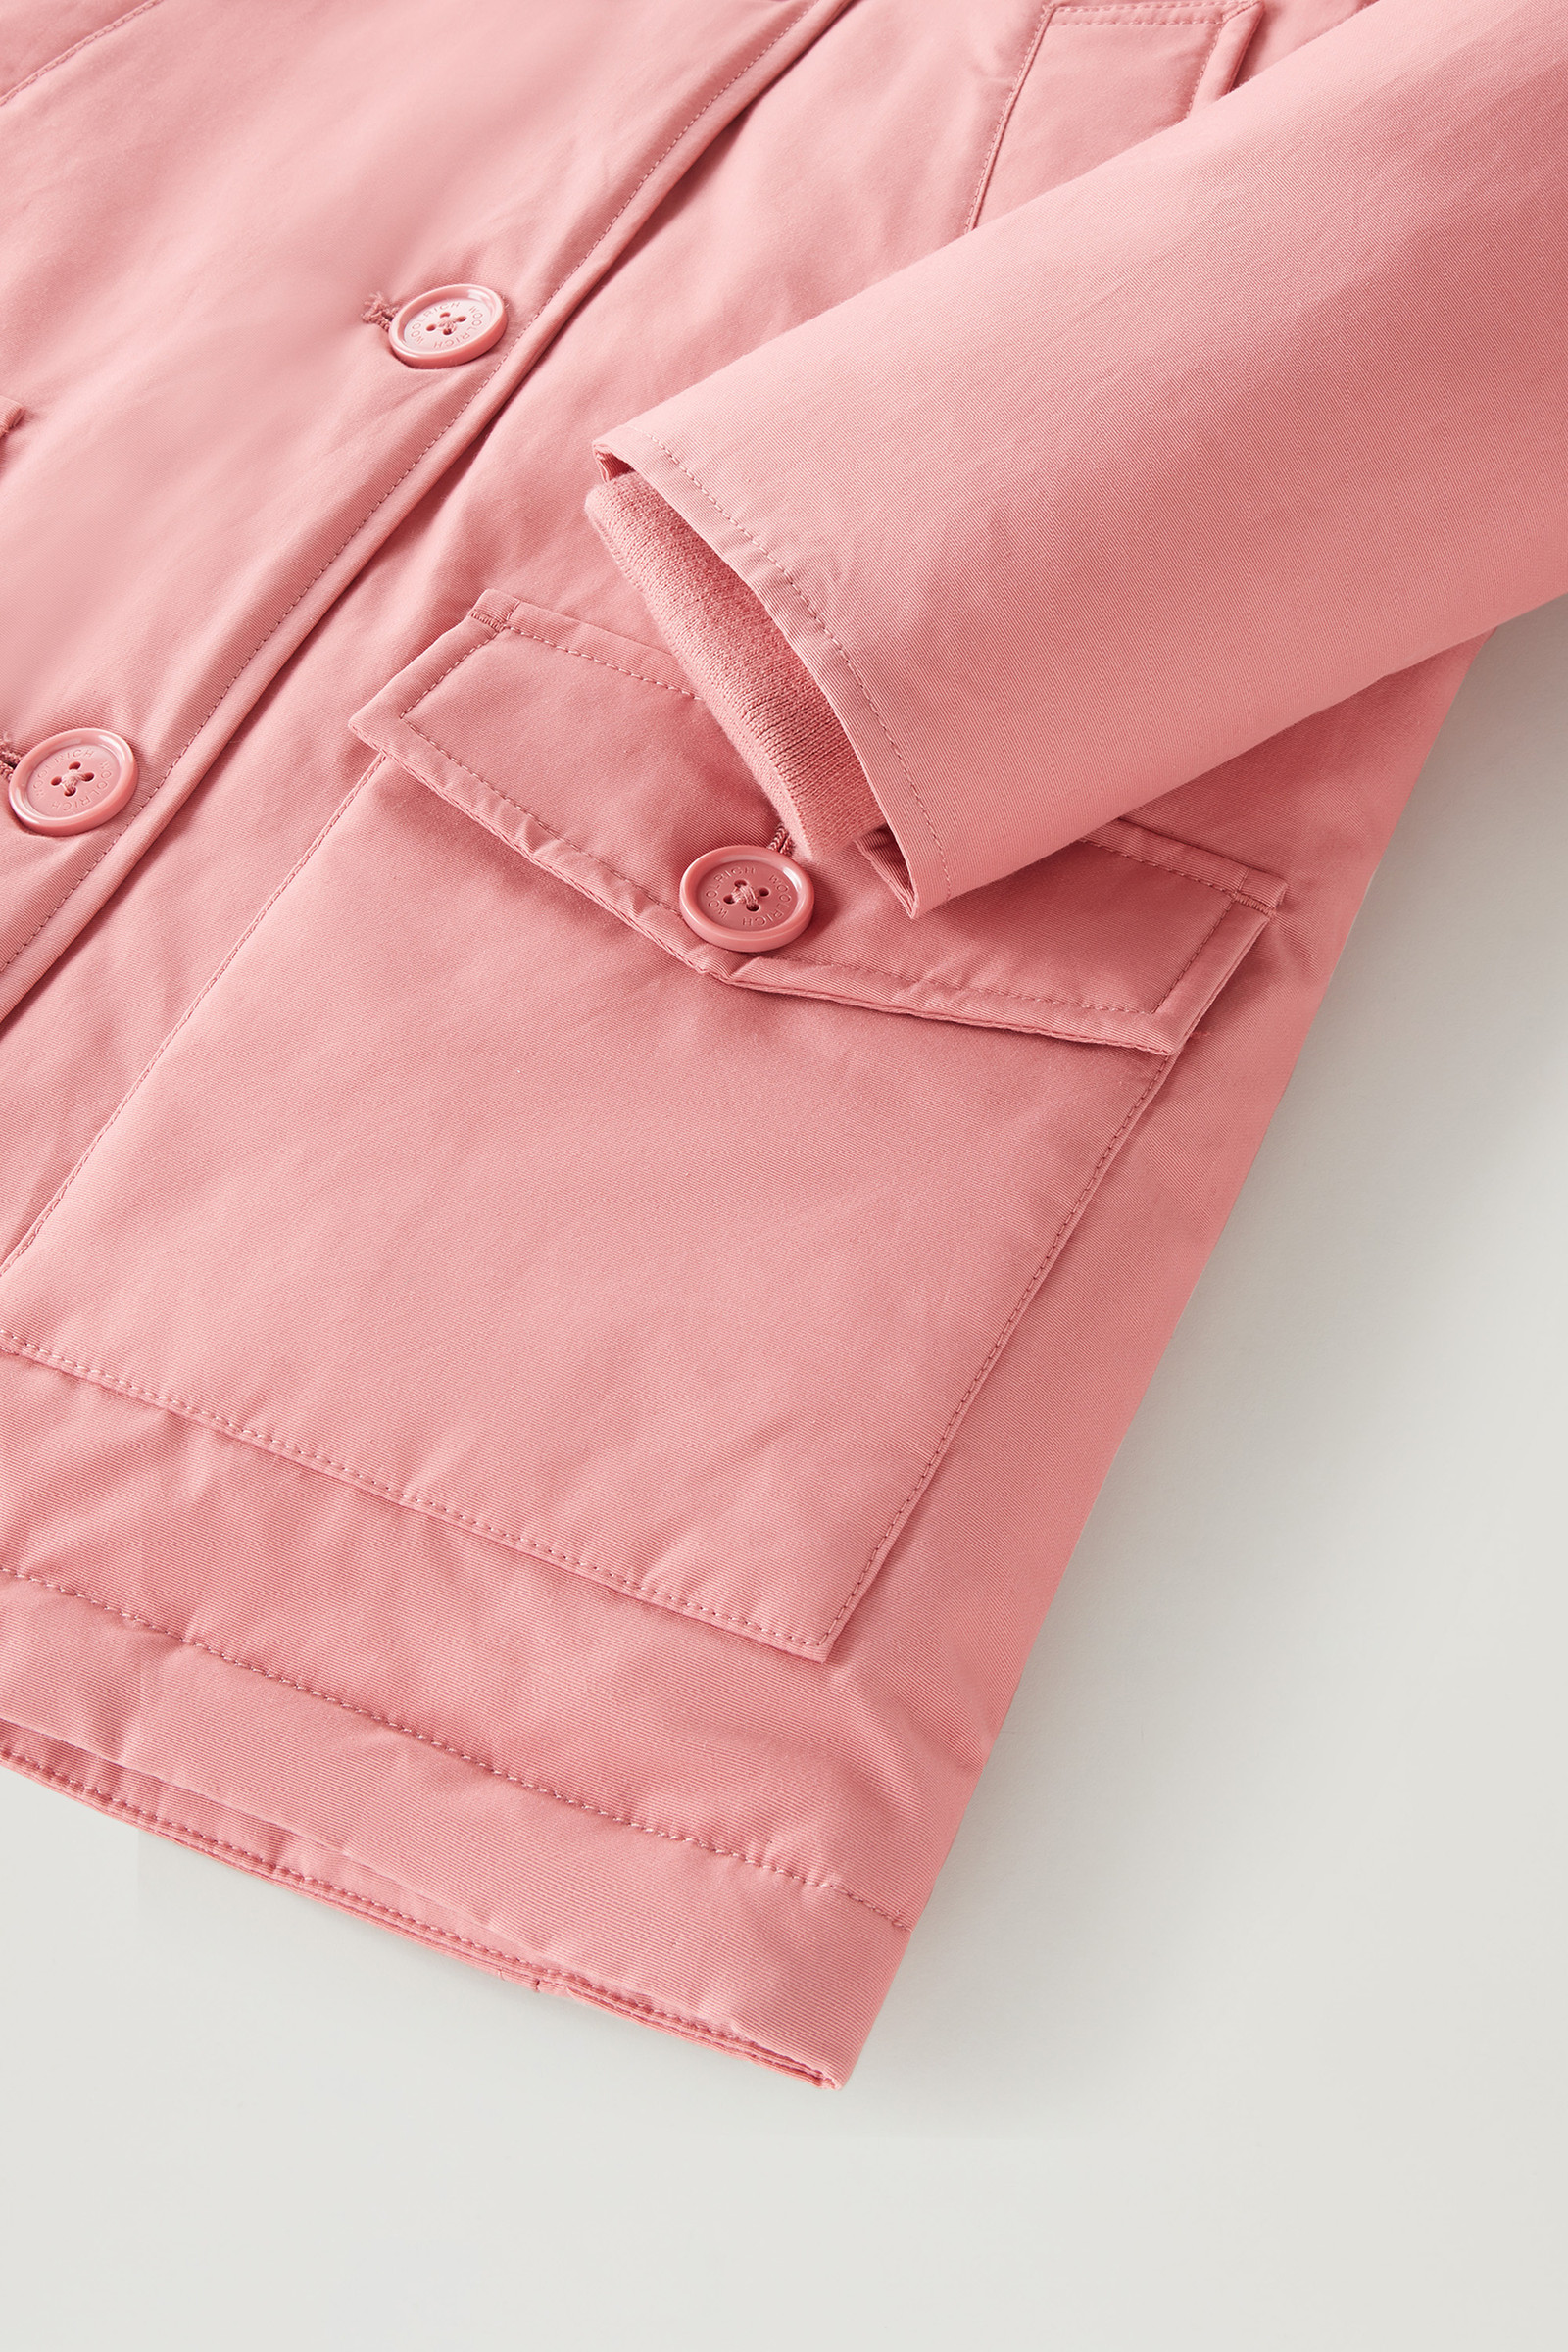 Details USA | Pink Cloth Girl\'s Woolrich with Ramar Arctic Parka in Satin